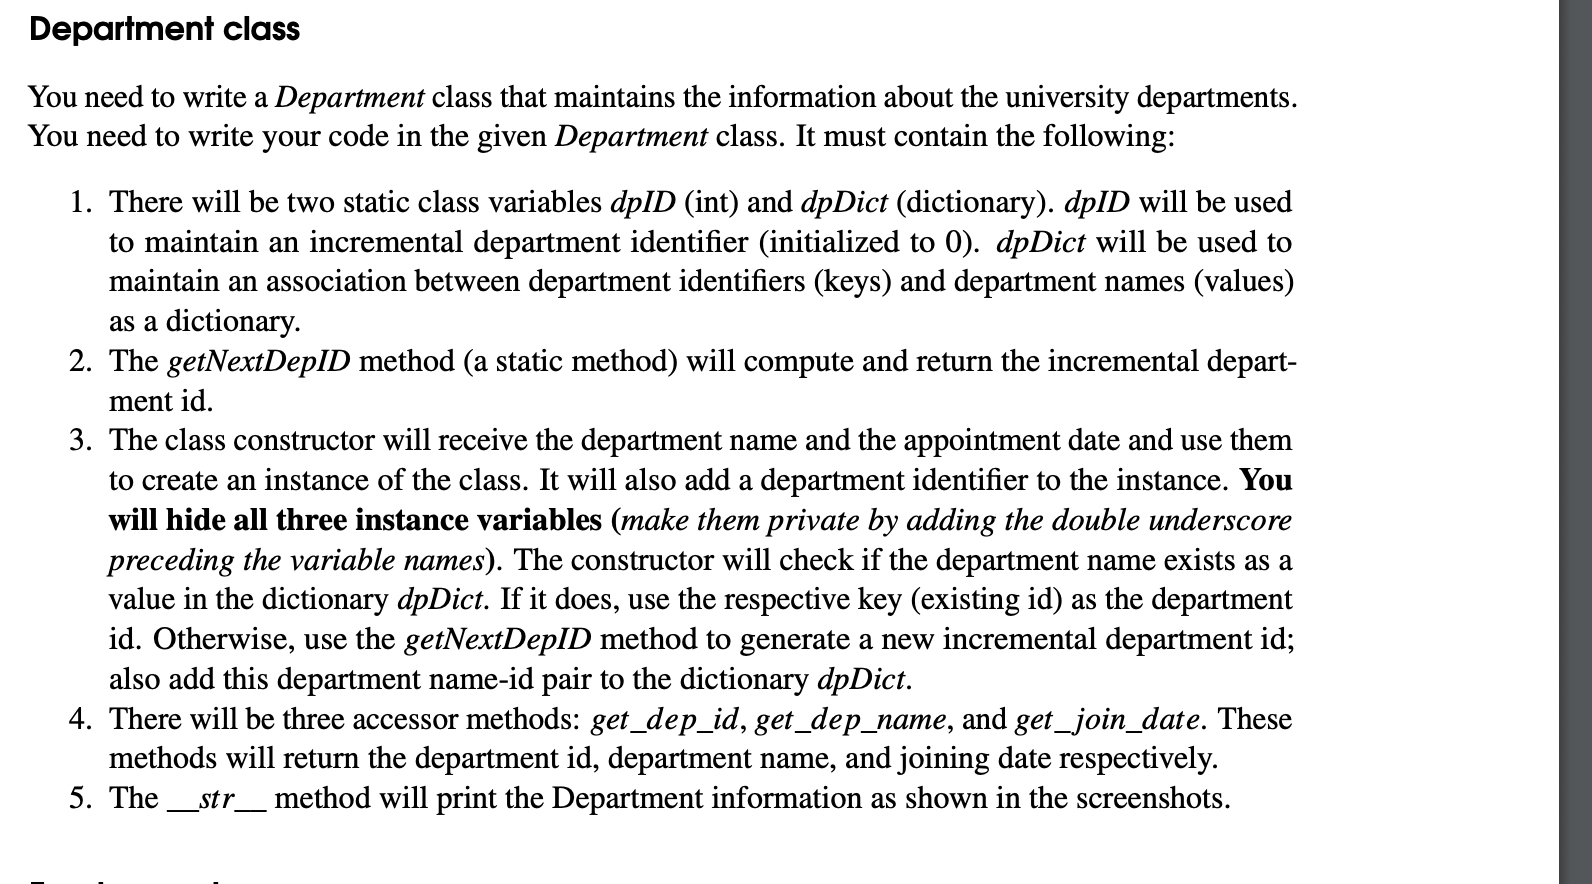 You need to write a Department class that maintains the information about the university departments. You need to write your